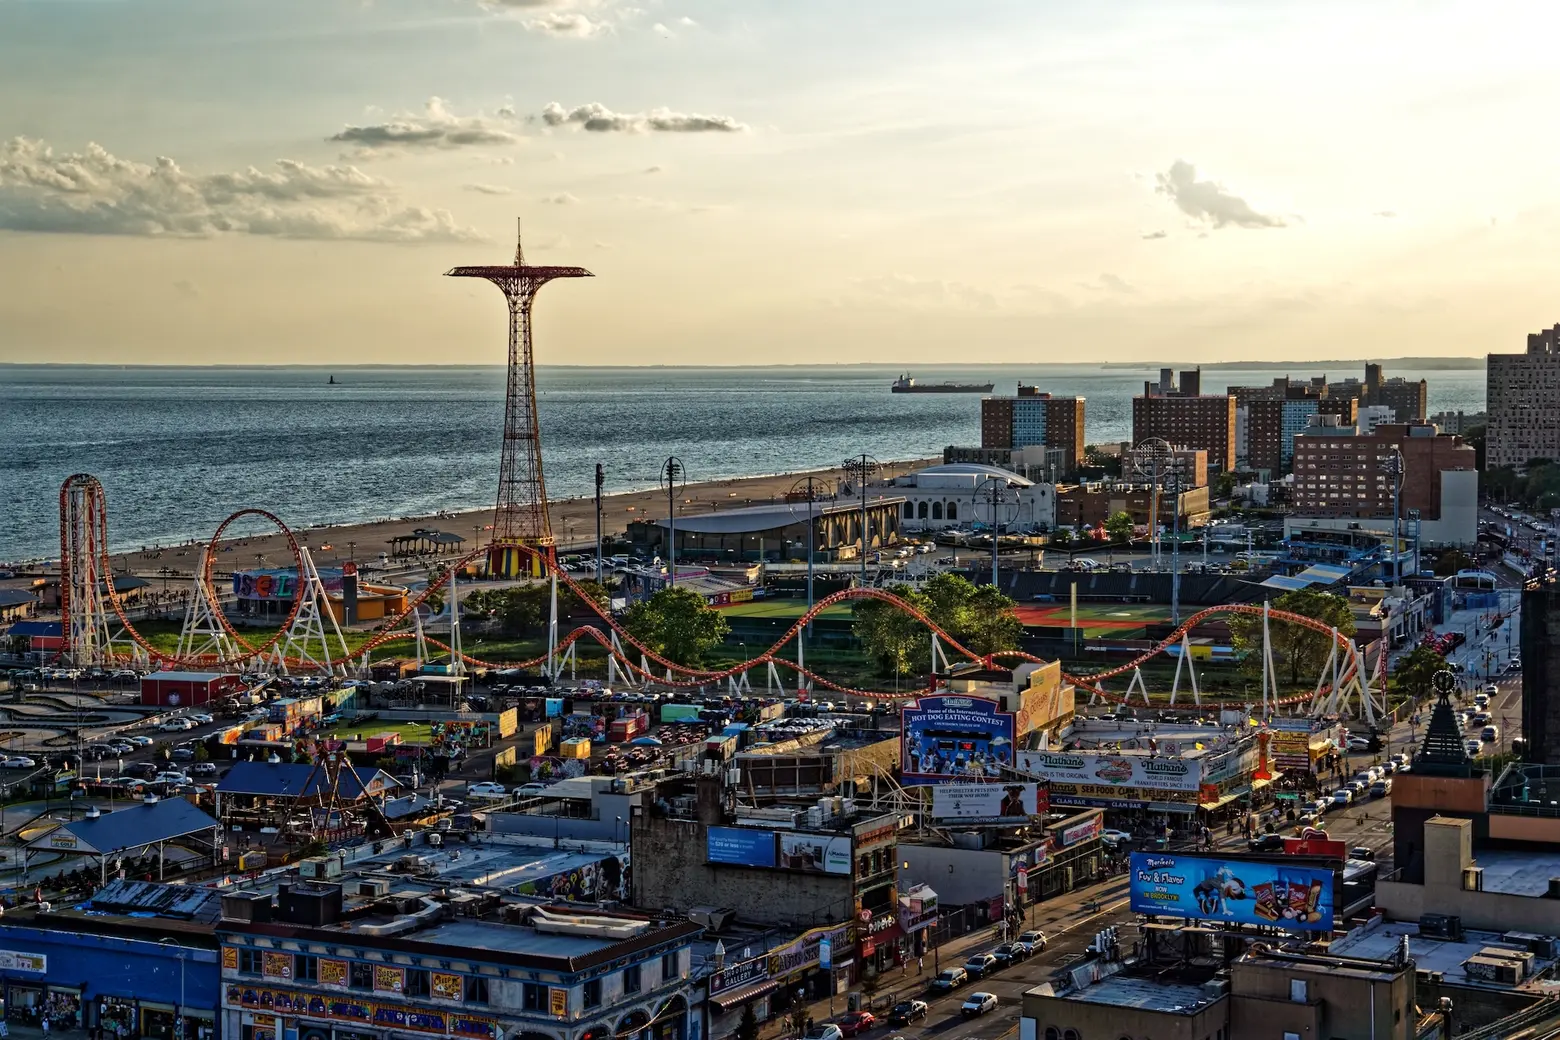 Coney Island’s Luna Park will stay open this winter for the first time ever